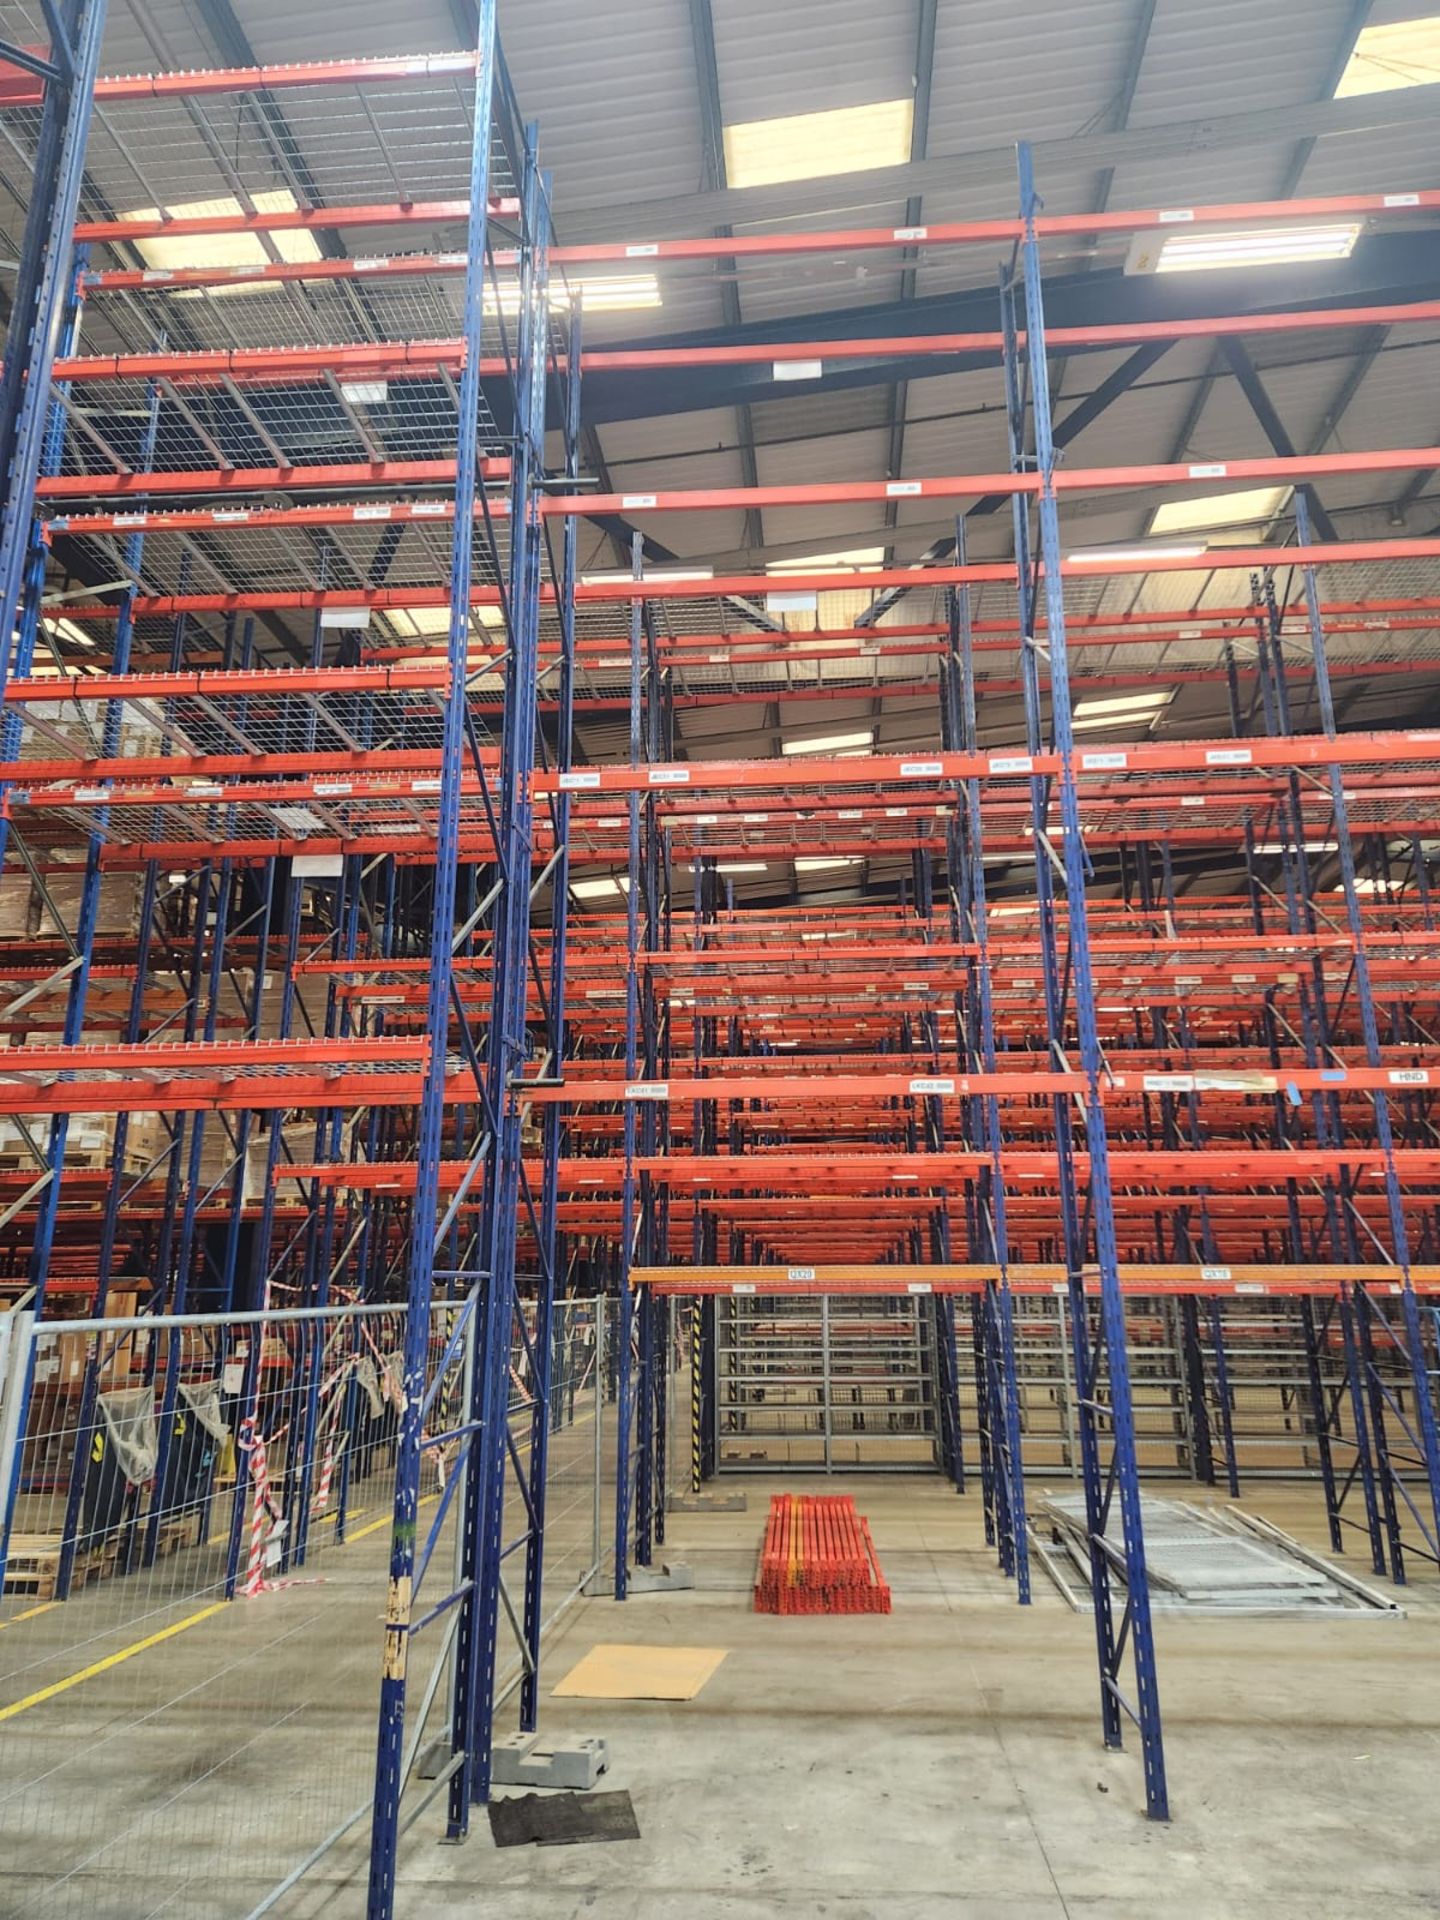 50 Bays of HiLo Racking - Industrial Pallet Racking - 2000kg per level - Image 2 of 2